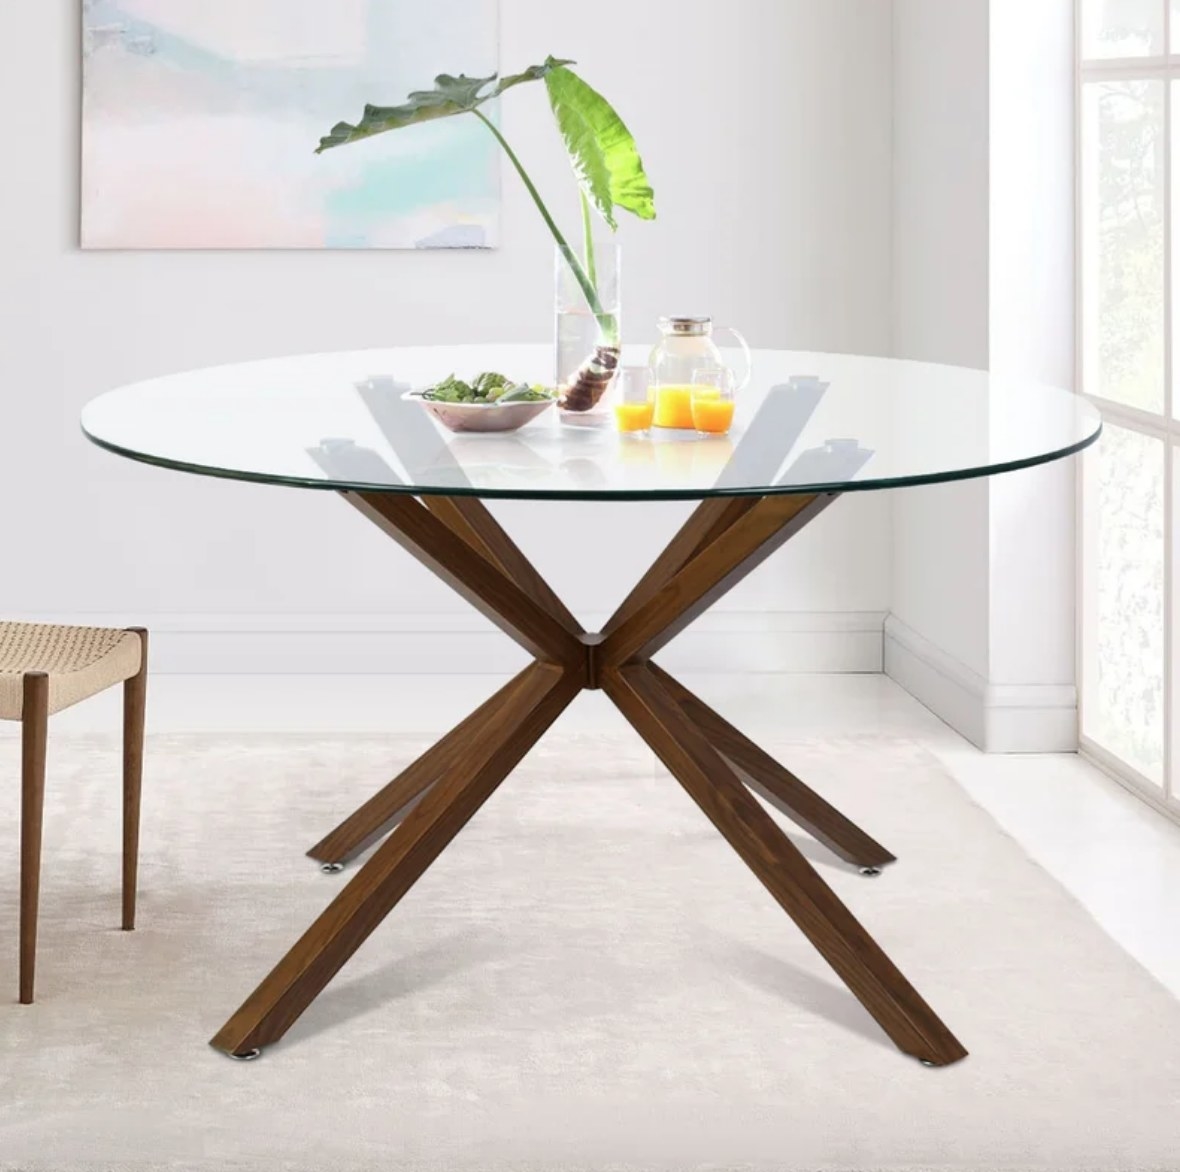 Glass top round table with brown legs